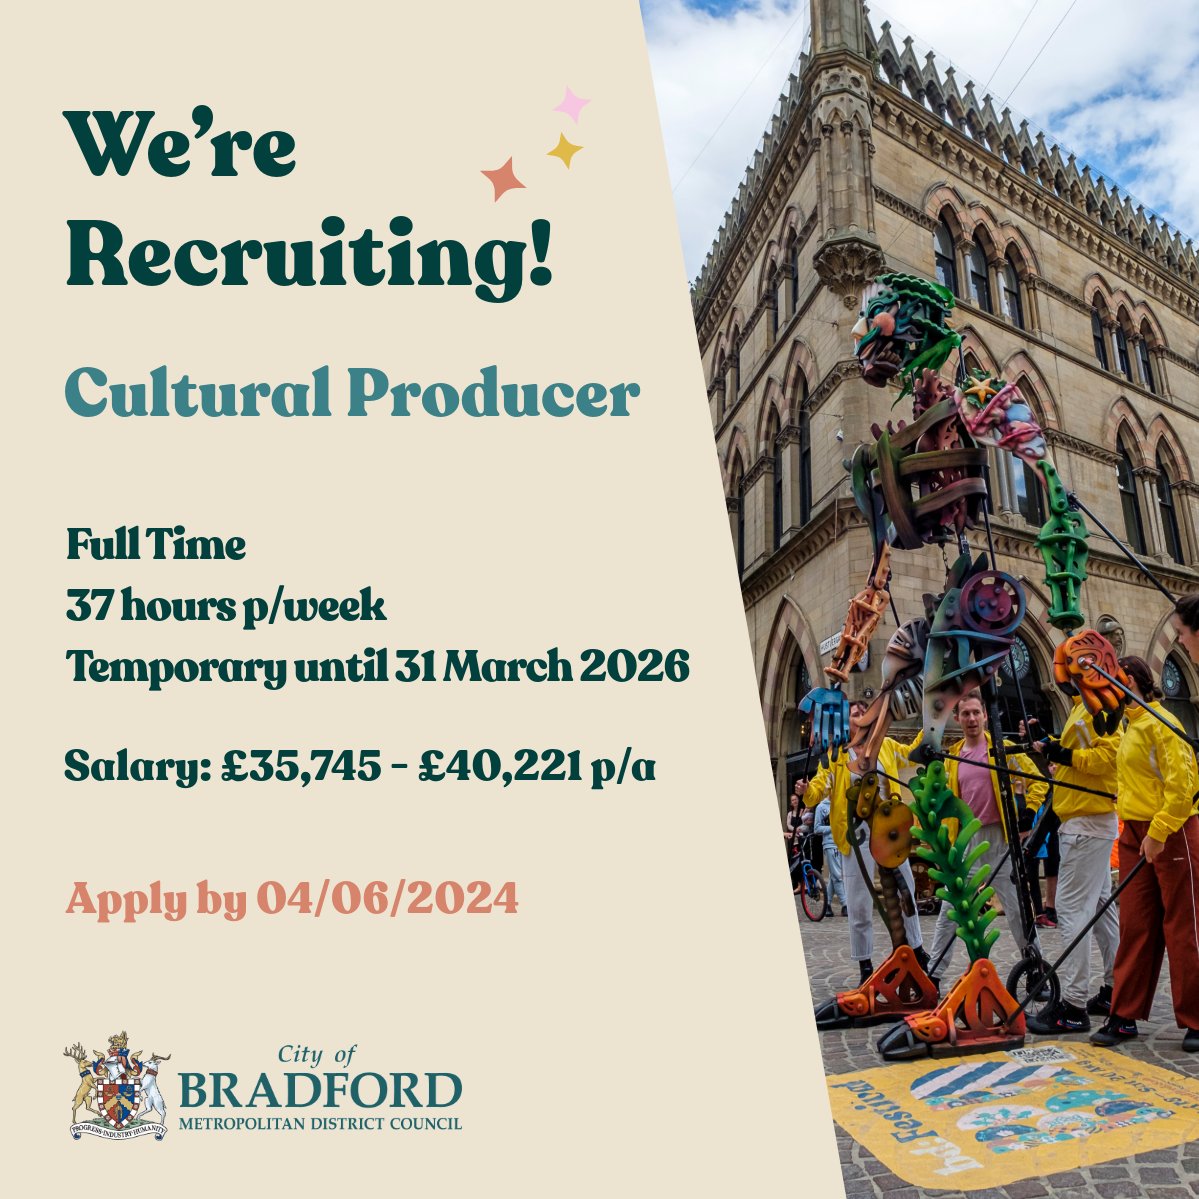 We're looking for a ✨ Cultural Producer ✨ Think it could be you? Find out more and apply here: orlo.uk/x6Cwu